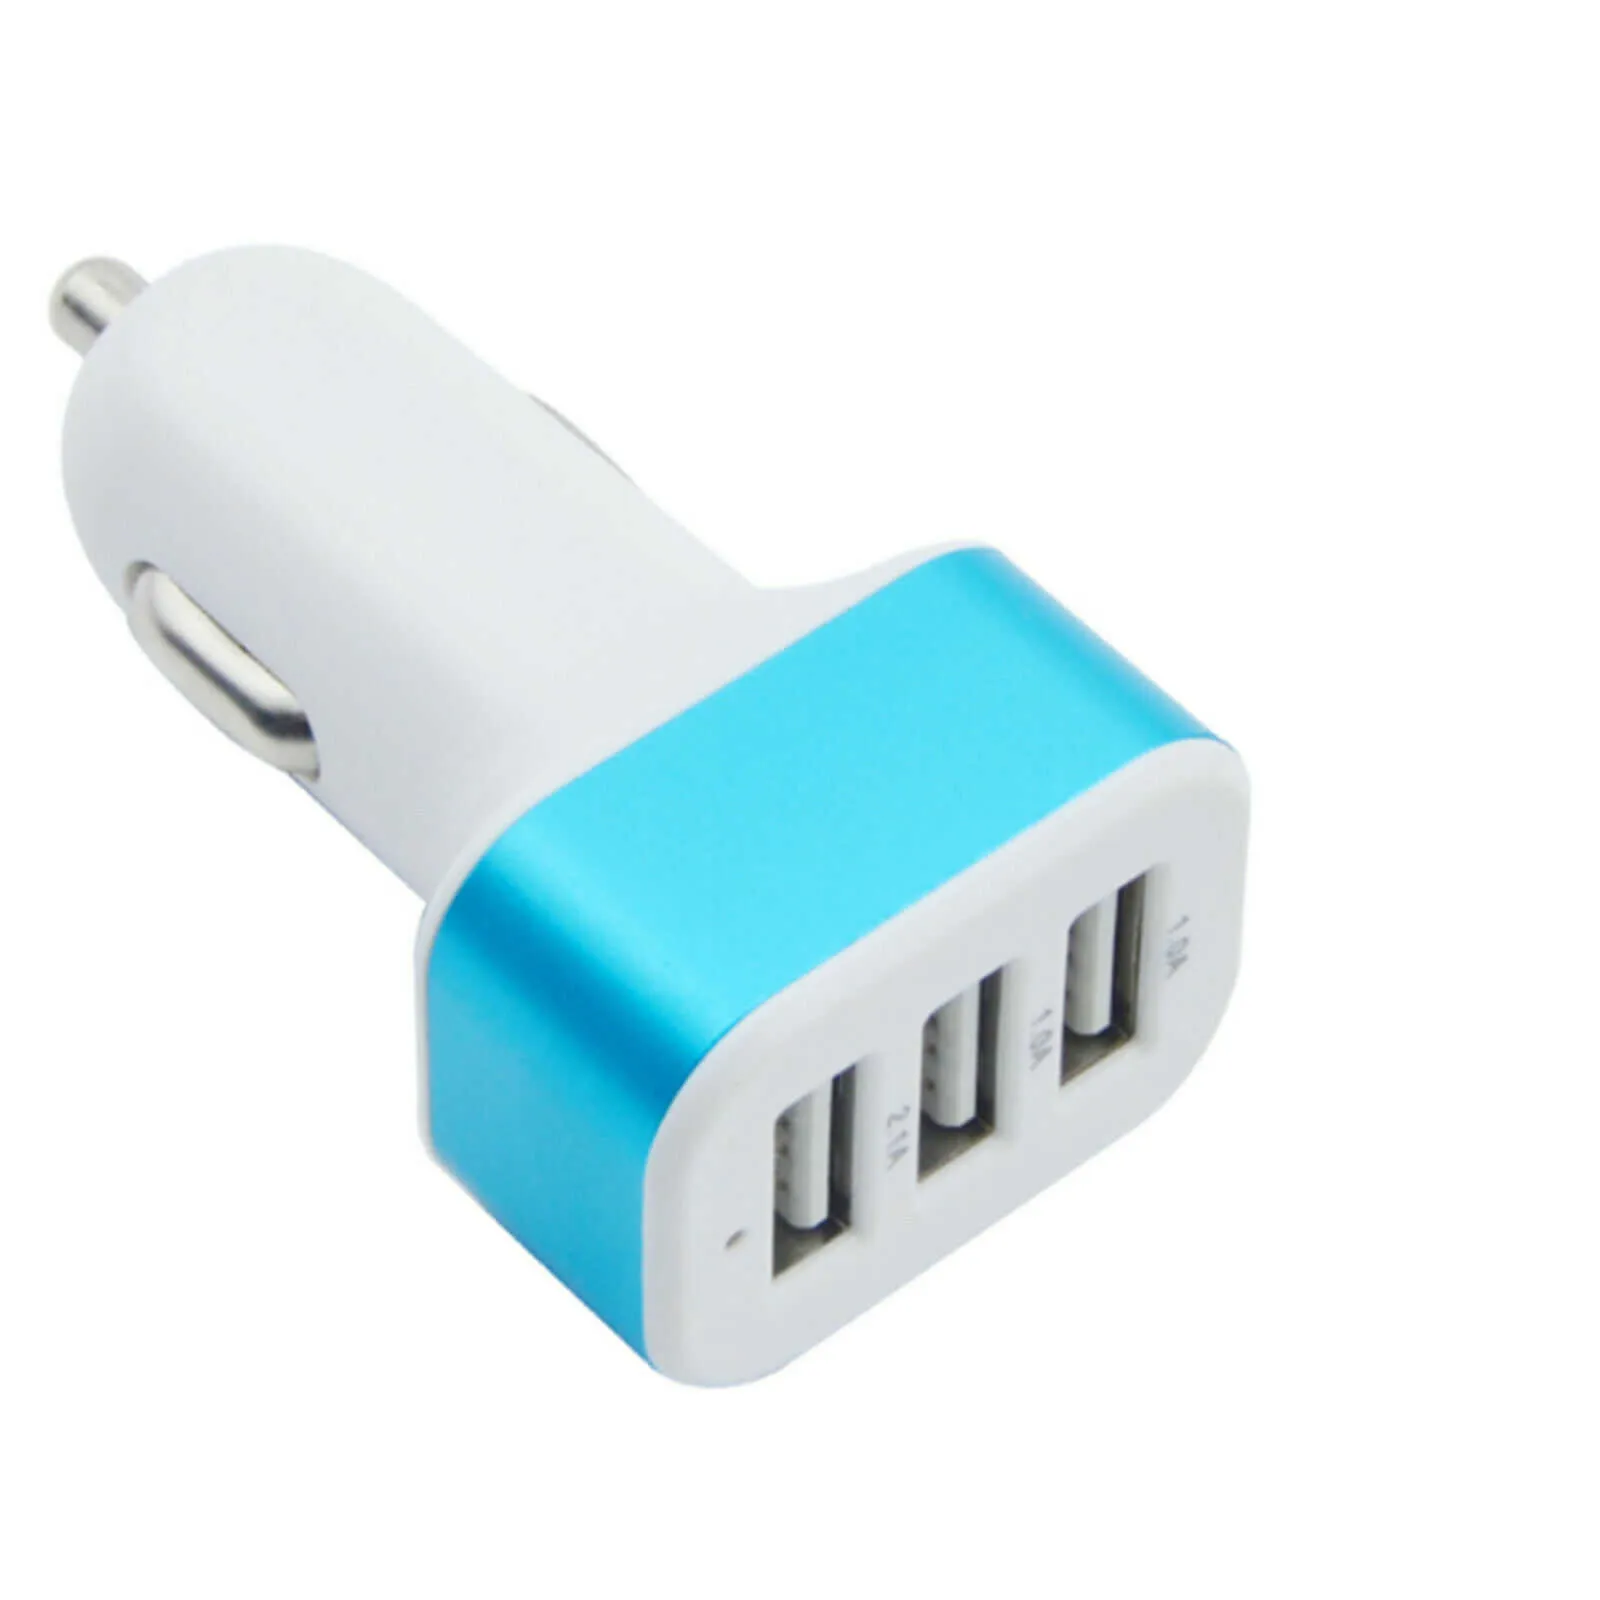 USB -billaddare 5V Triple USB 3 Port Car Charger Driving Adapter Power Bank For Universal Phone 3 Port Phone Charger Adapter Ny A3184717